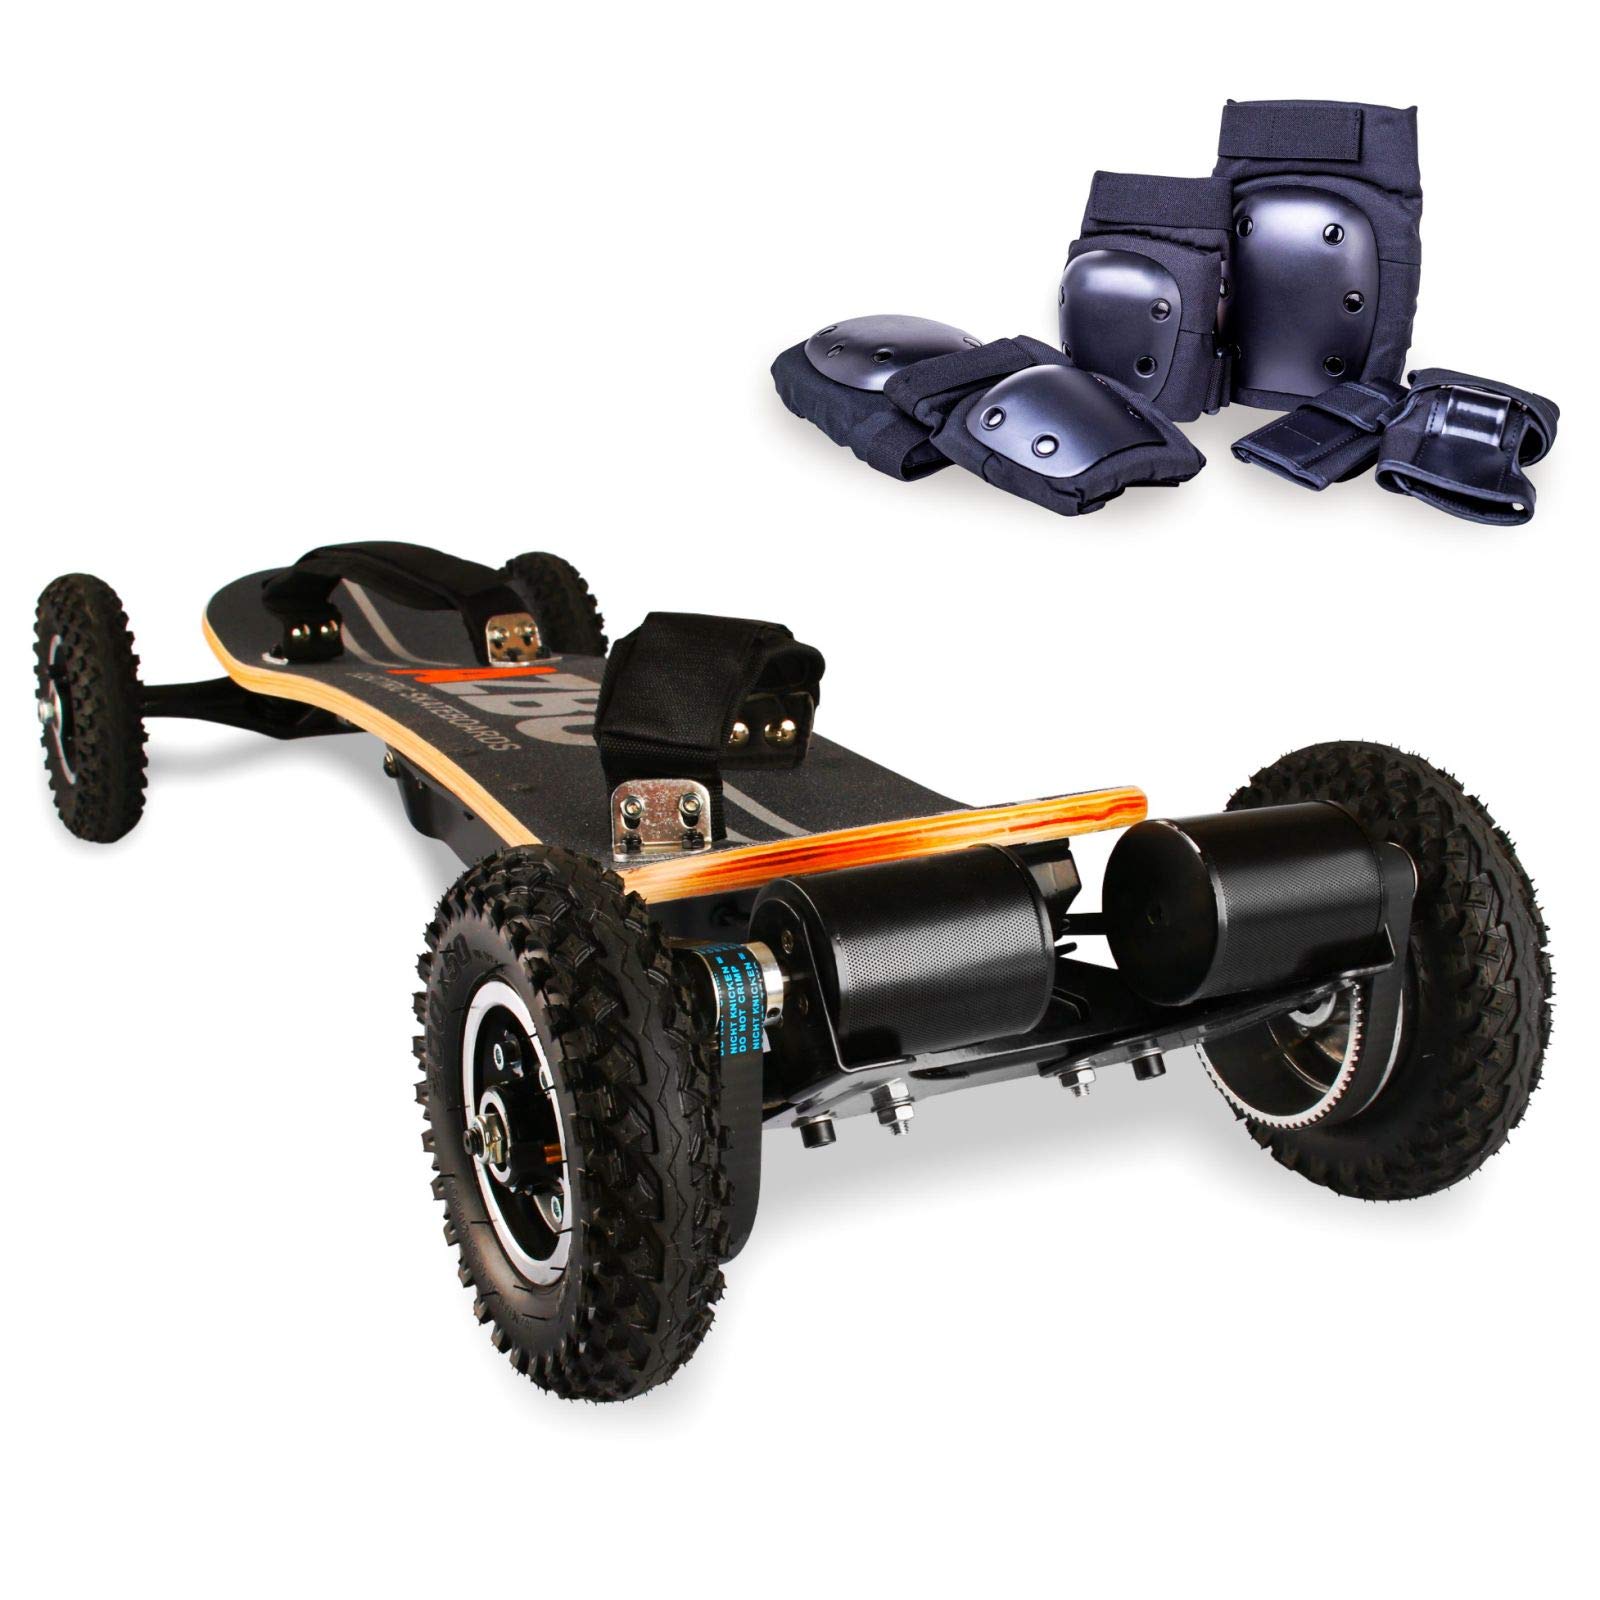 Book Cover Off Road Electric Skateboard with Remote Control - 3300W Dual Motor - UL2272 Certified high Speed 25 MPH Motorized Mountain Y8 Longboard with bindings for Cruising | LG Battery